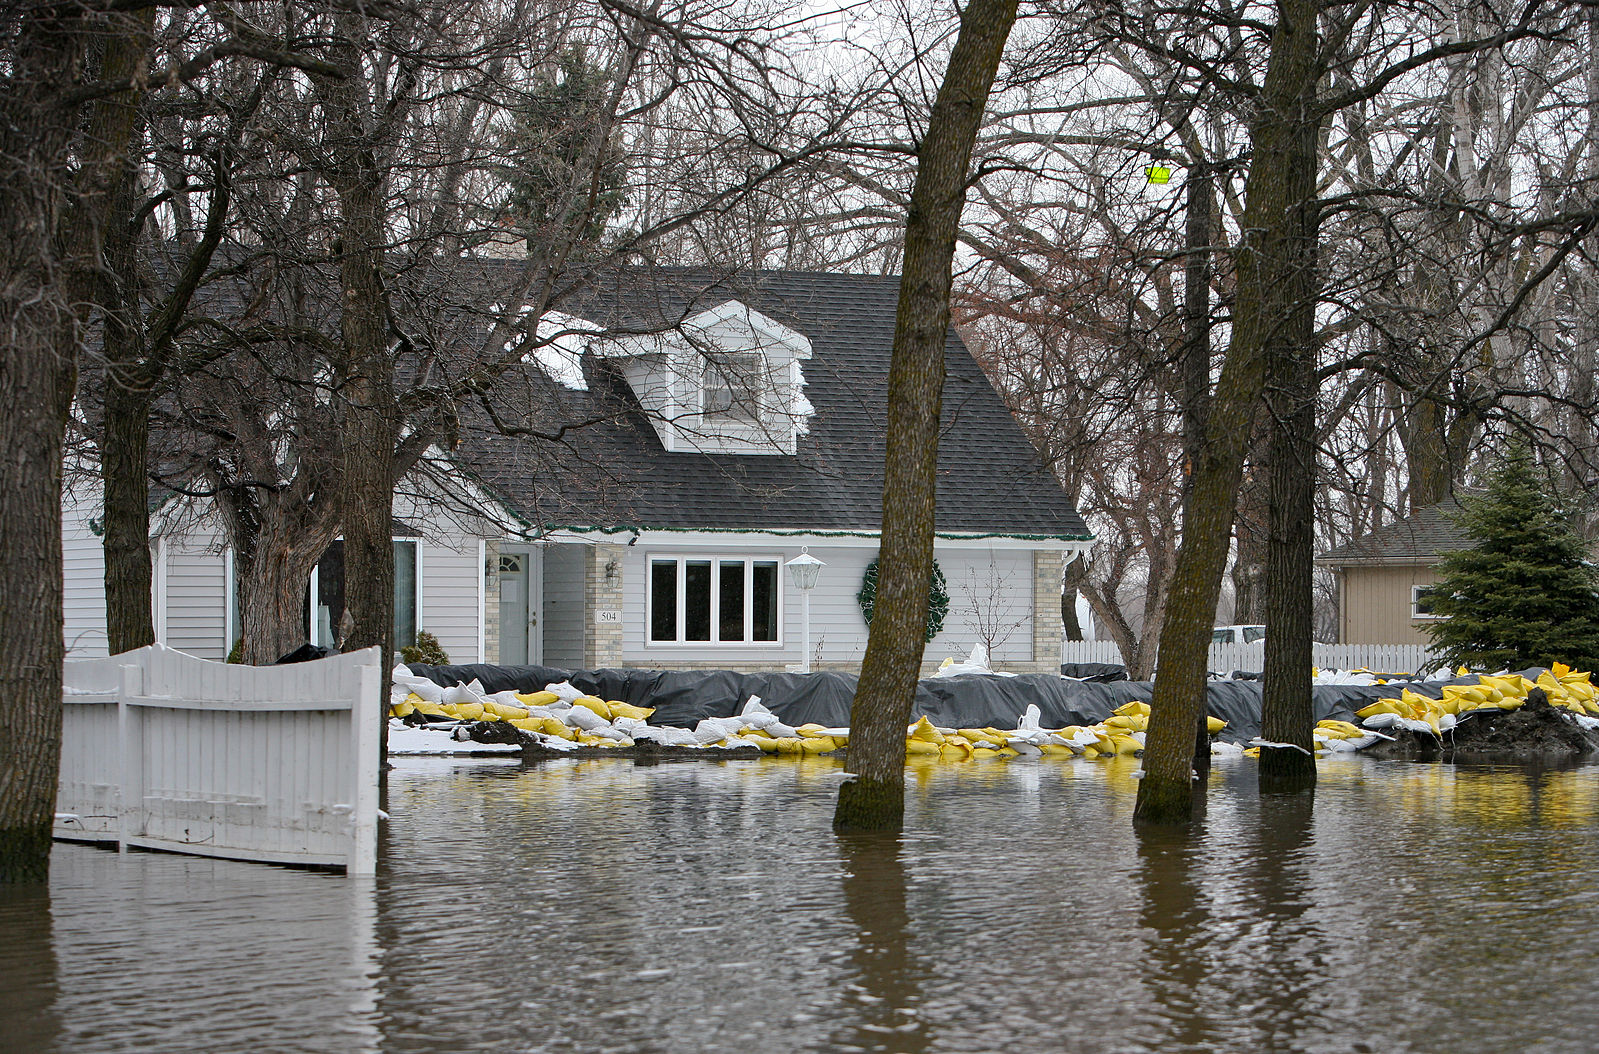 Sand Bagged home in surrounded by flood water. FEMA News Photo